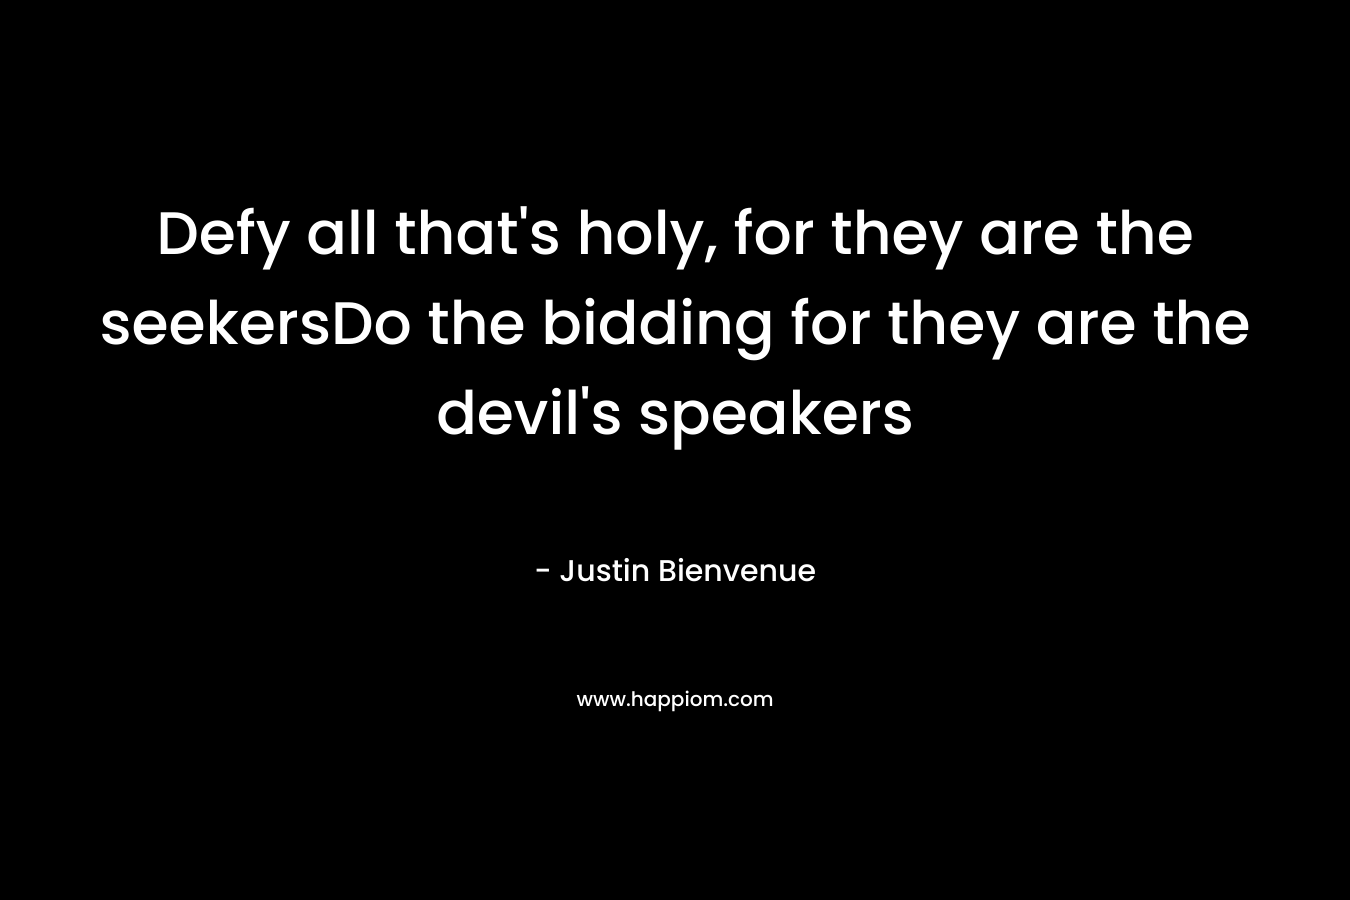 Defy all that’s holy, for they are the seekersDo the bidding for they are the devil’s speakers – Justin Bienvenue